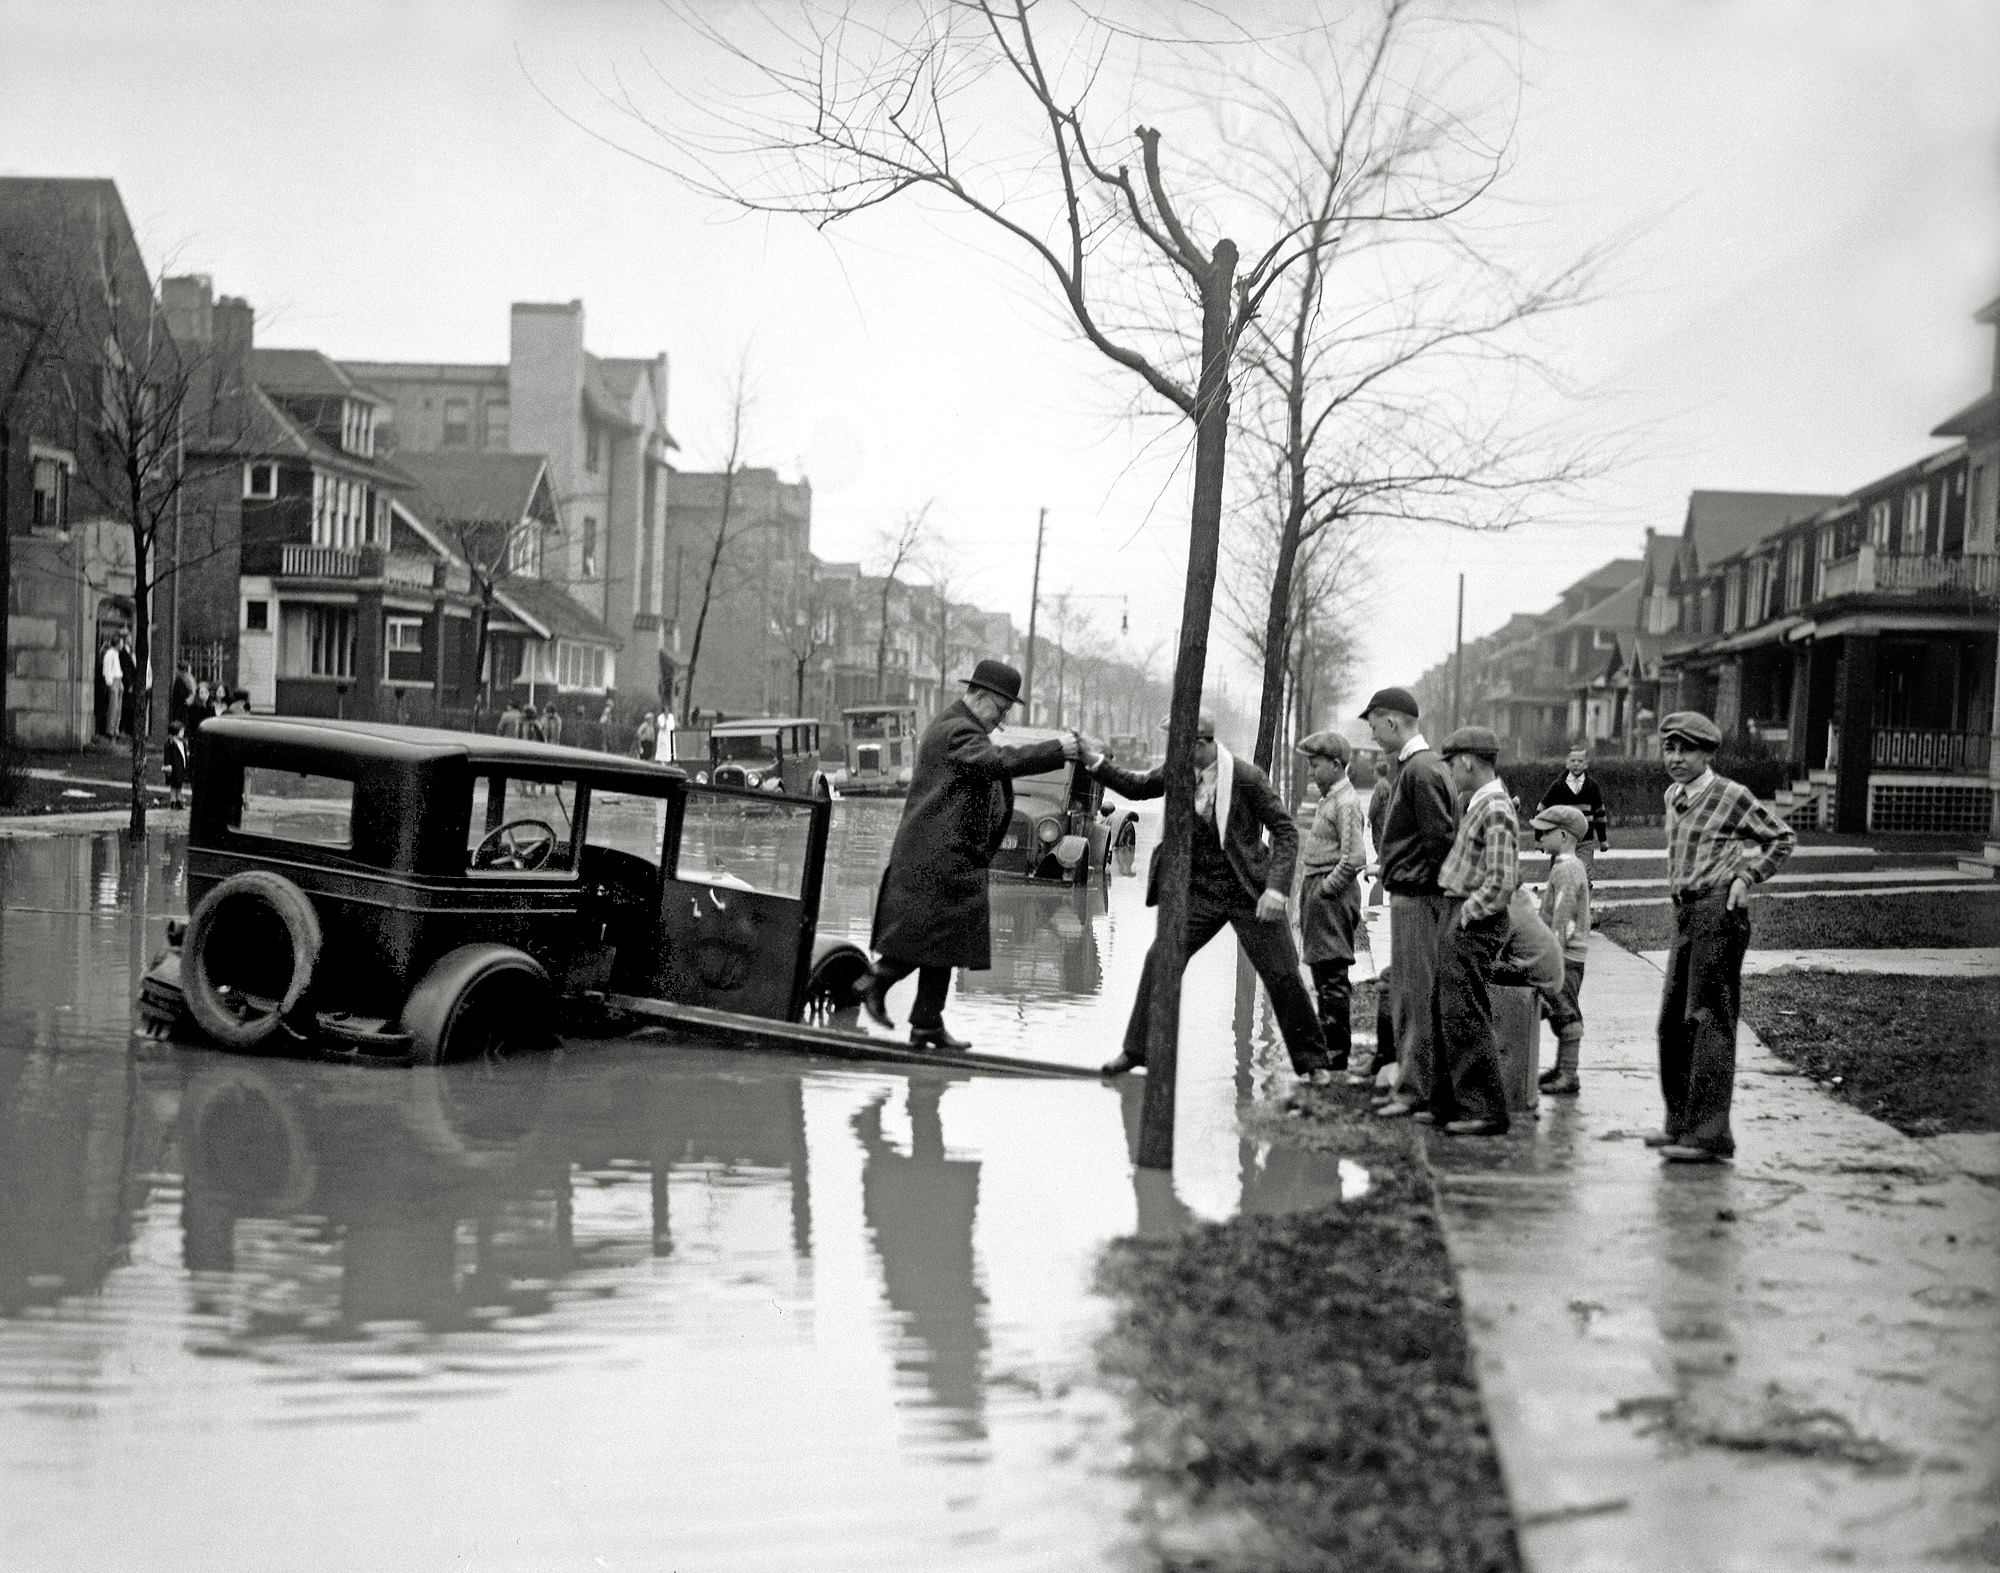 An obviously dedicated cigar smoker being rescued from his partially submerged car in Detroit from 1926.  From an inherited collection of 4x5 glass negatives. View full size.